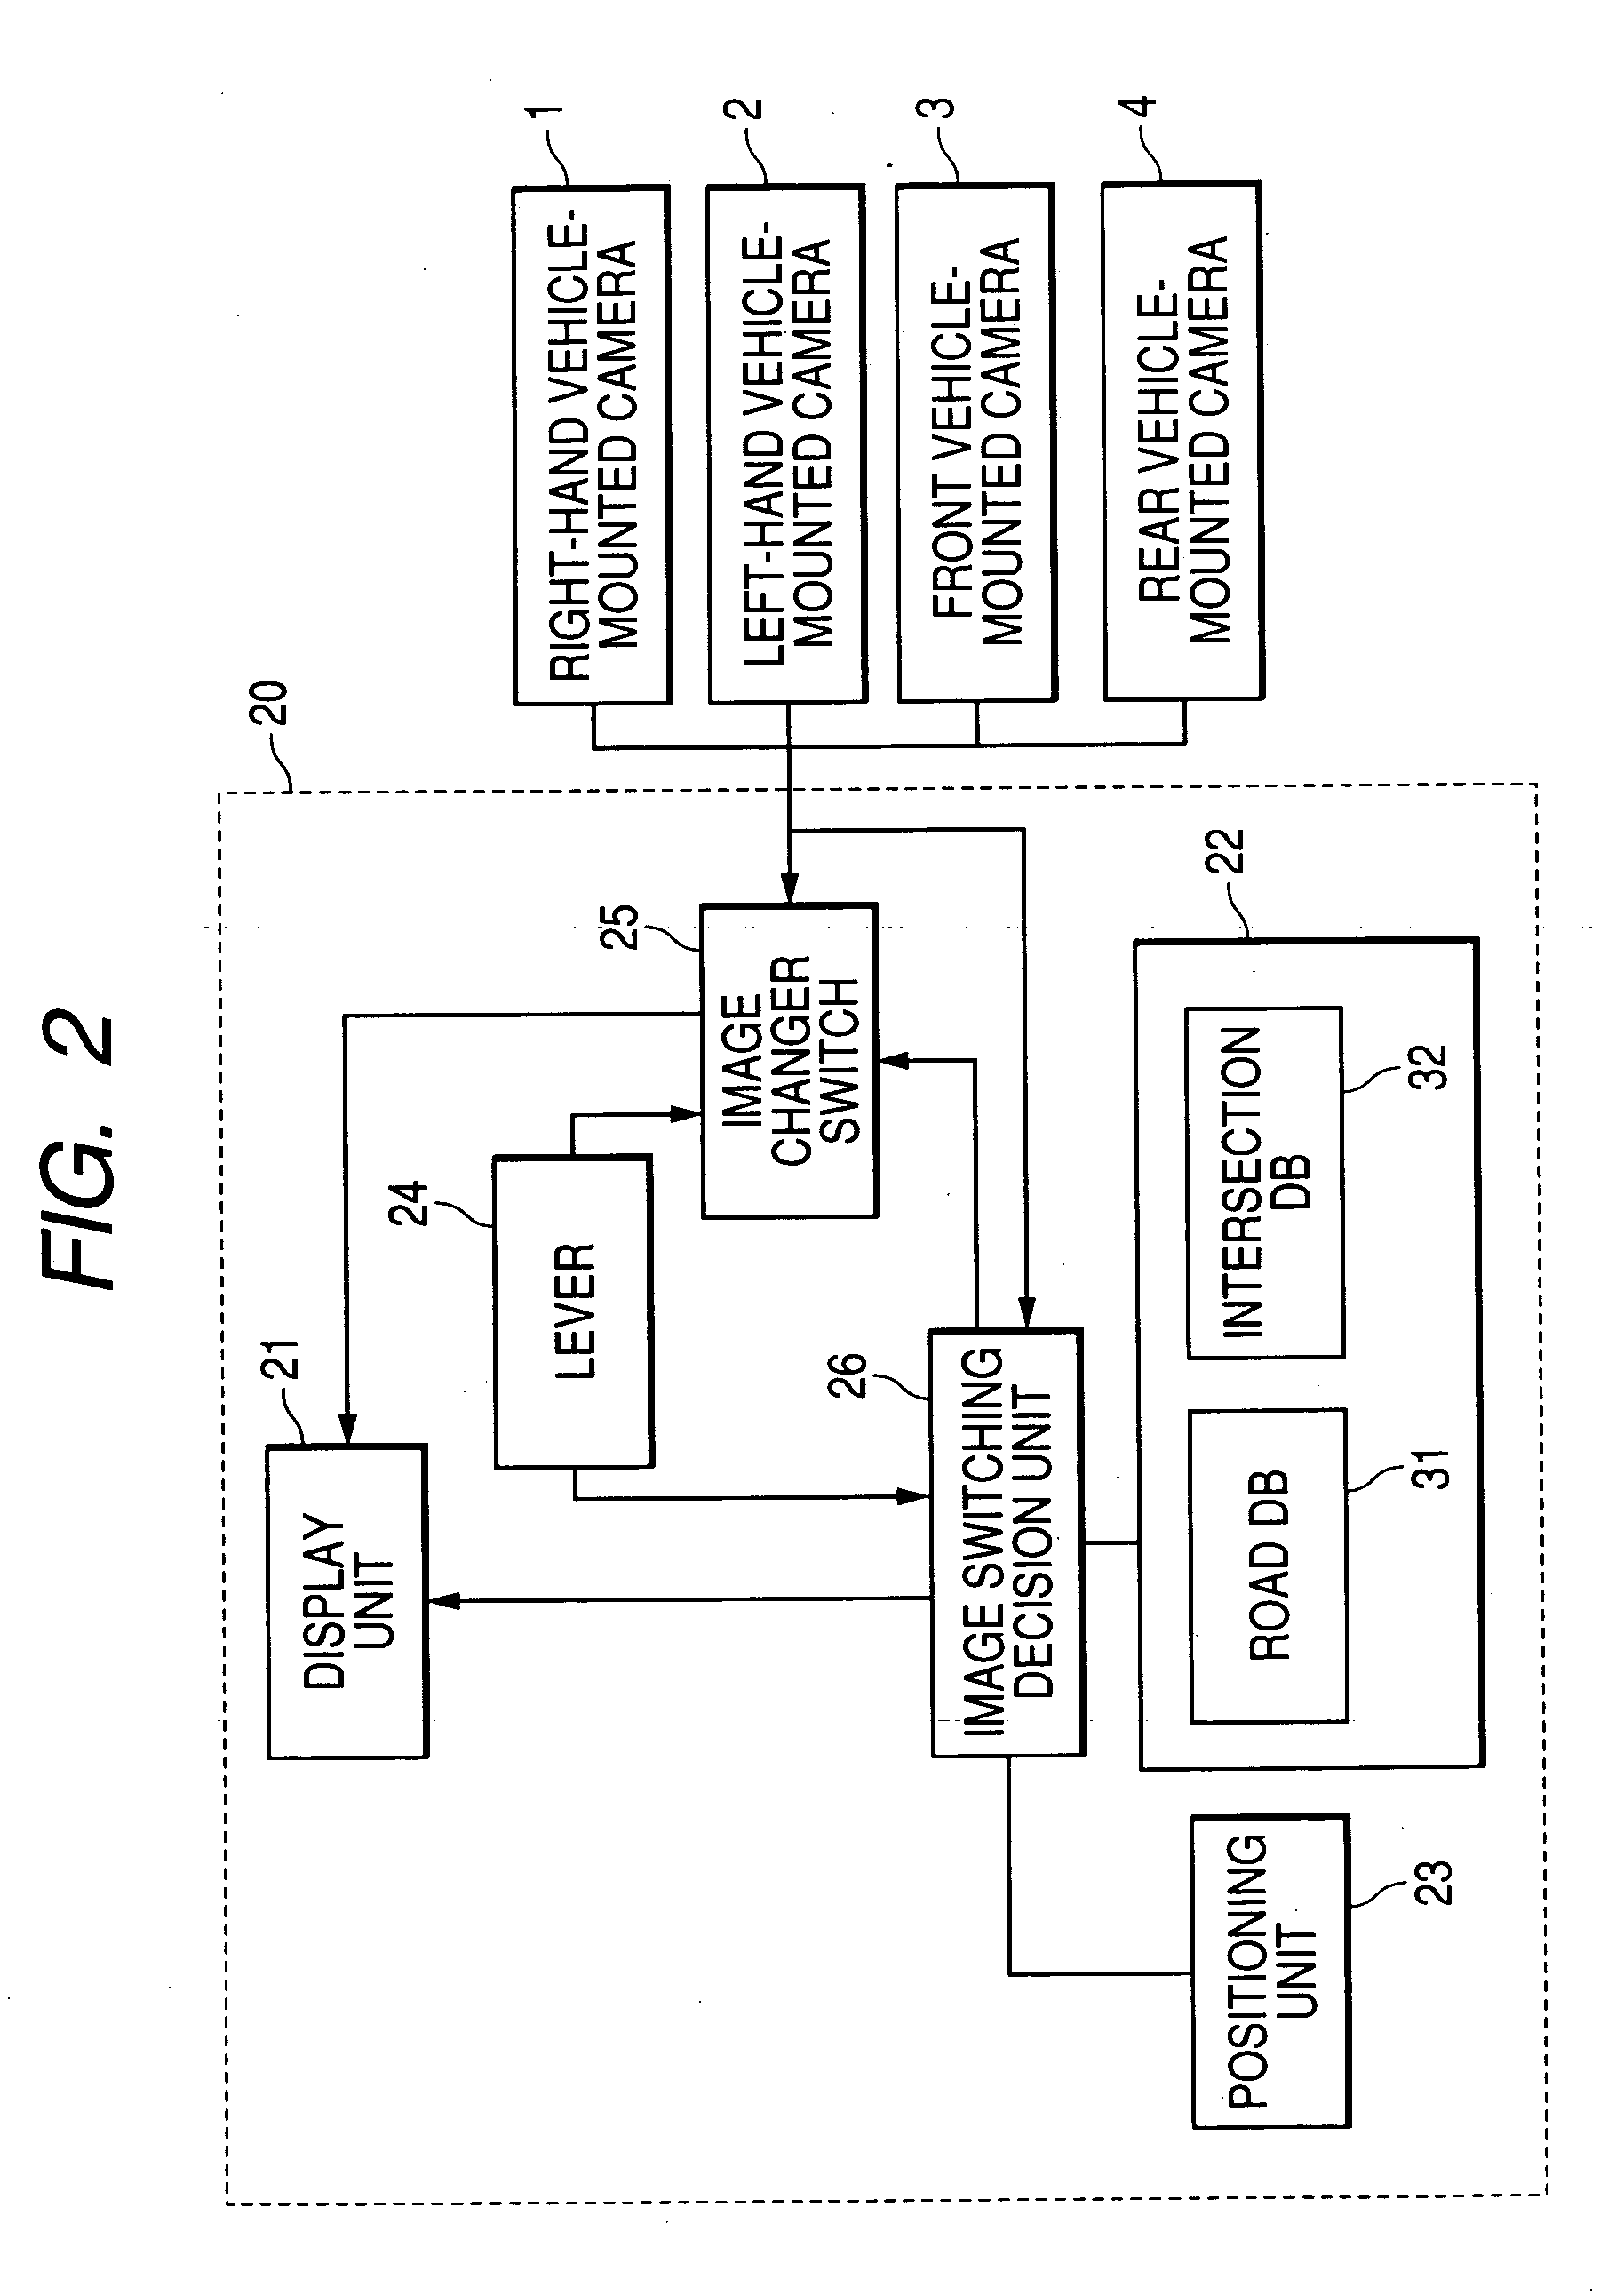 Vehicle periphery display control system